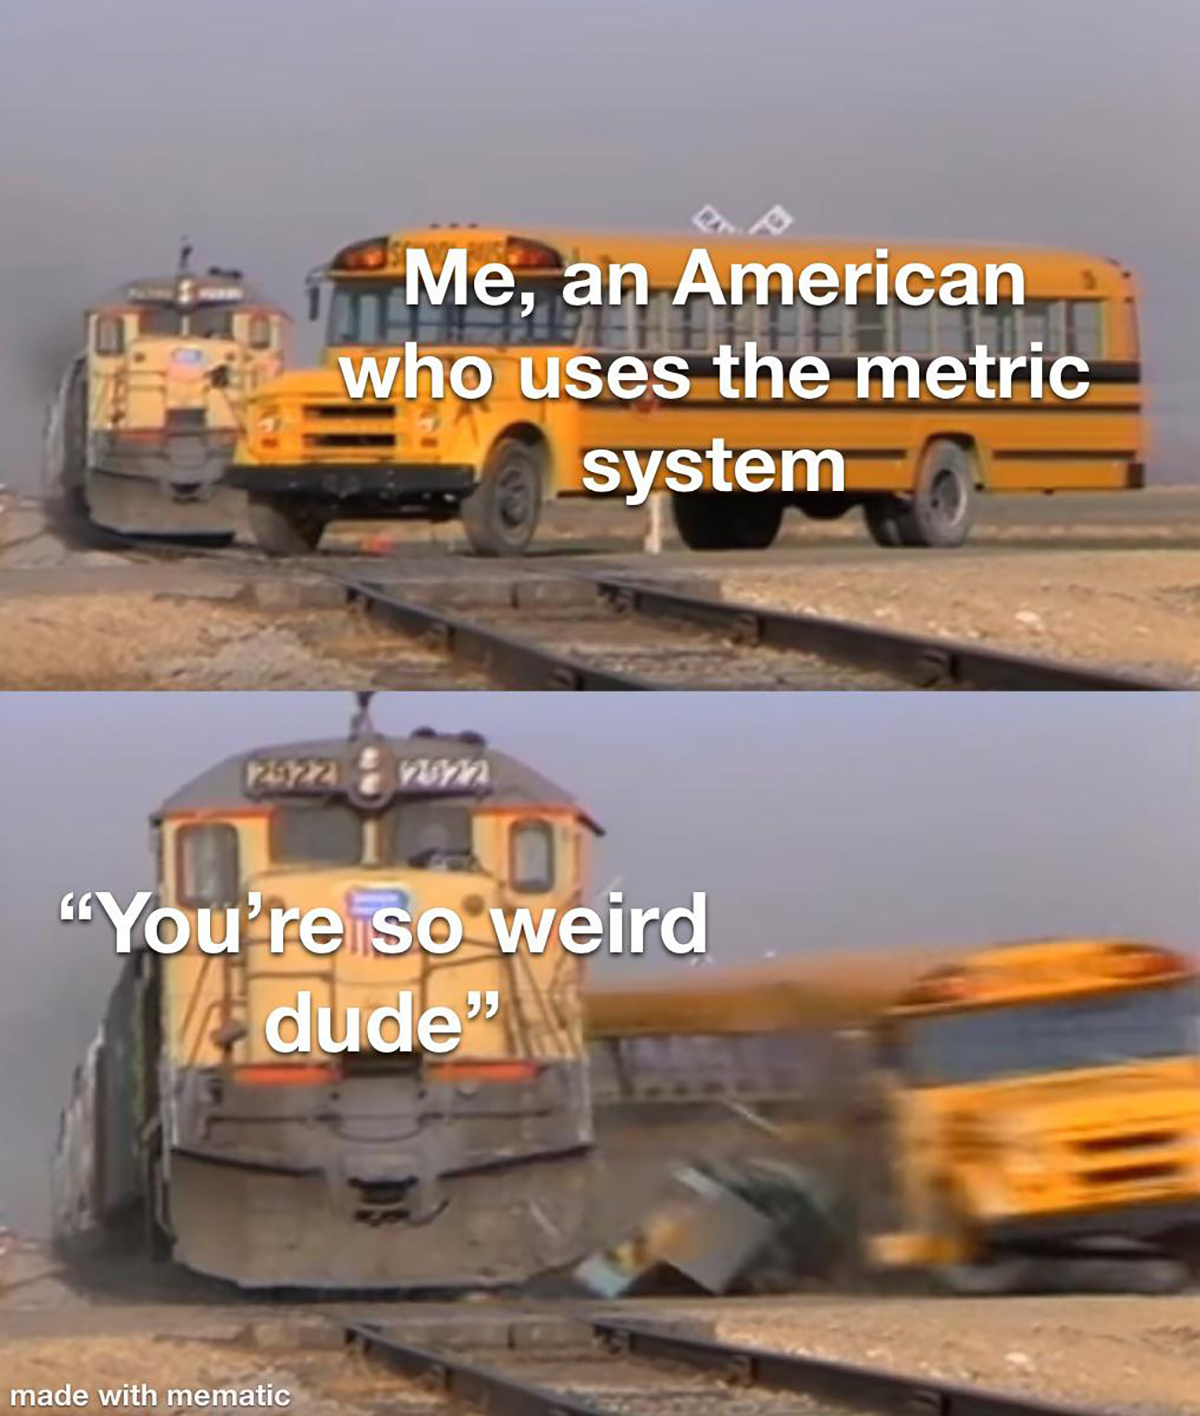 dank memes - just print more money meme - Me, an American who uses the metric system 1240224 "You're so weird dude" made with mematic